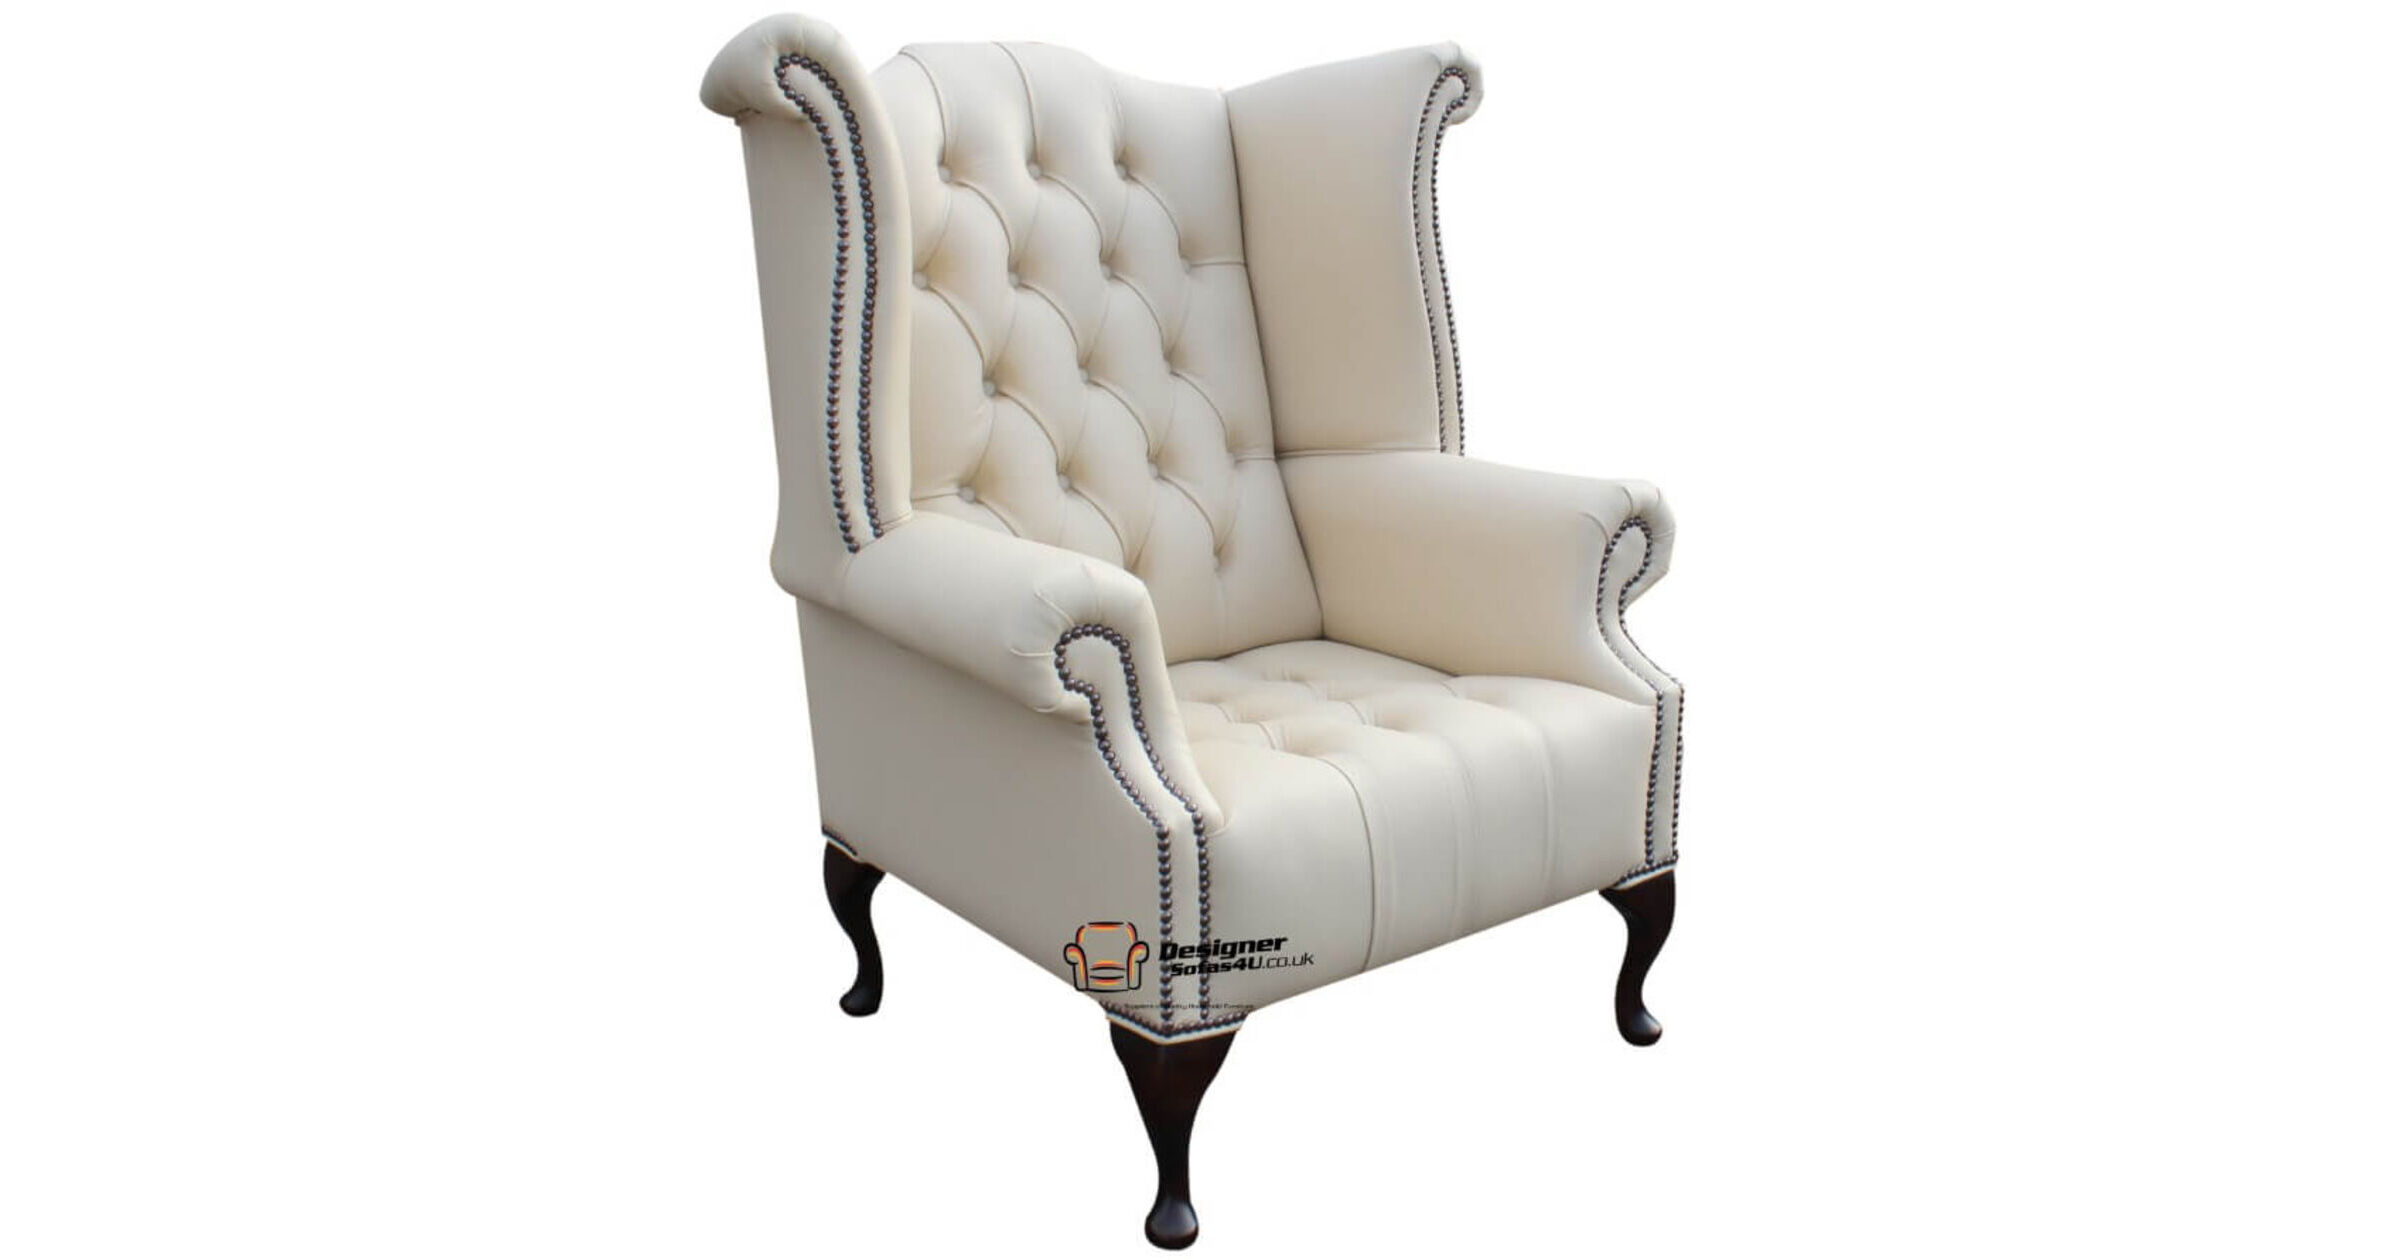 Leather Queen Anne Wingback Chairs Designer Sofas 4u